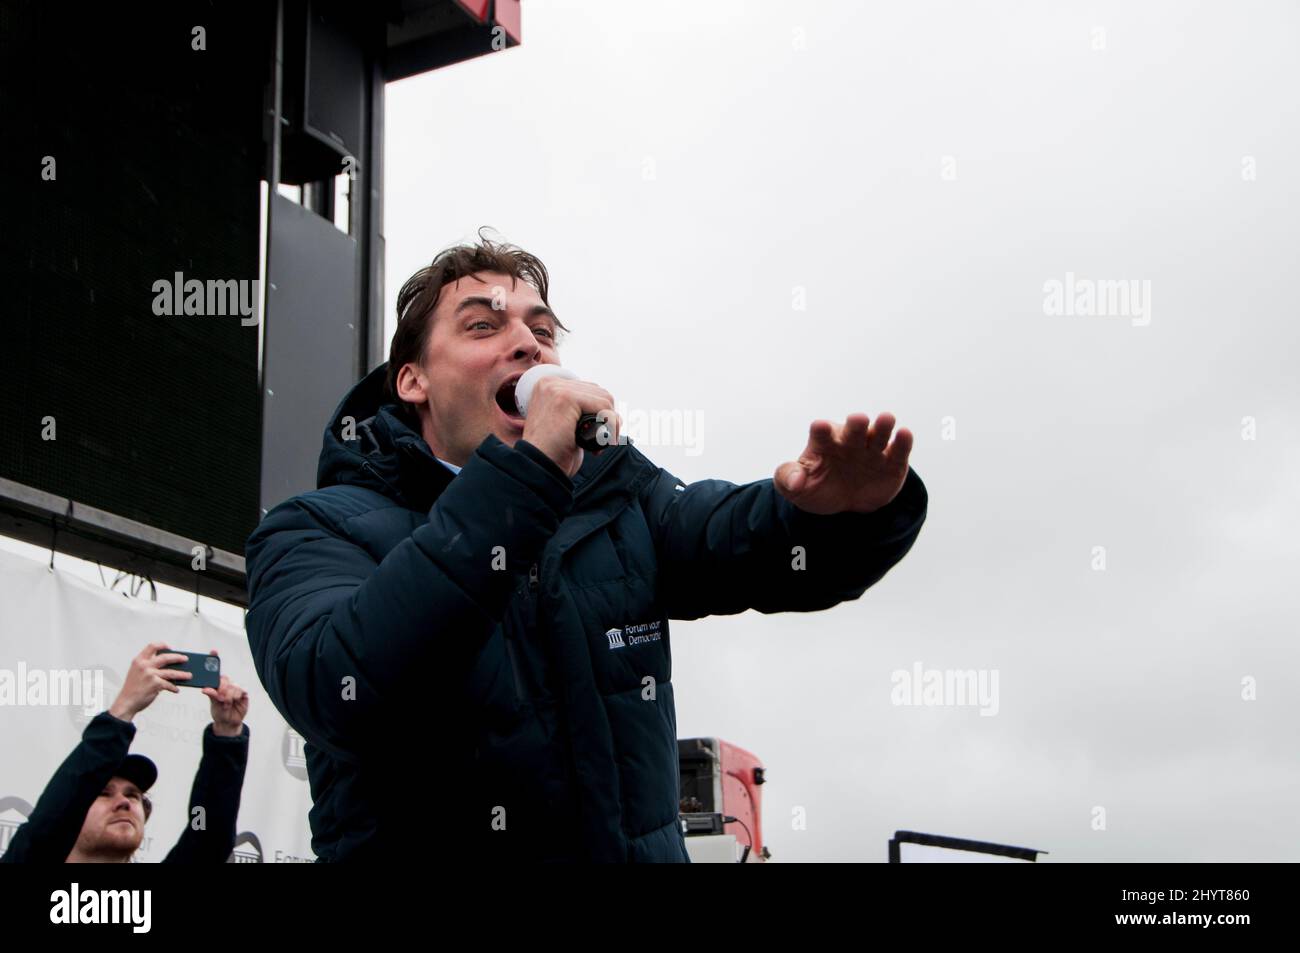 03-16-2021.Leiden,Netherlands.Dutch politician Thierry Baudet speaking at a rally of Forum voor Democratie ,a Dutch right wing/conservative party Stock Photo